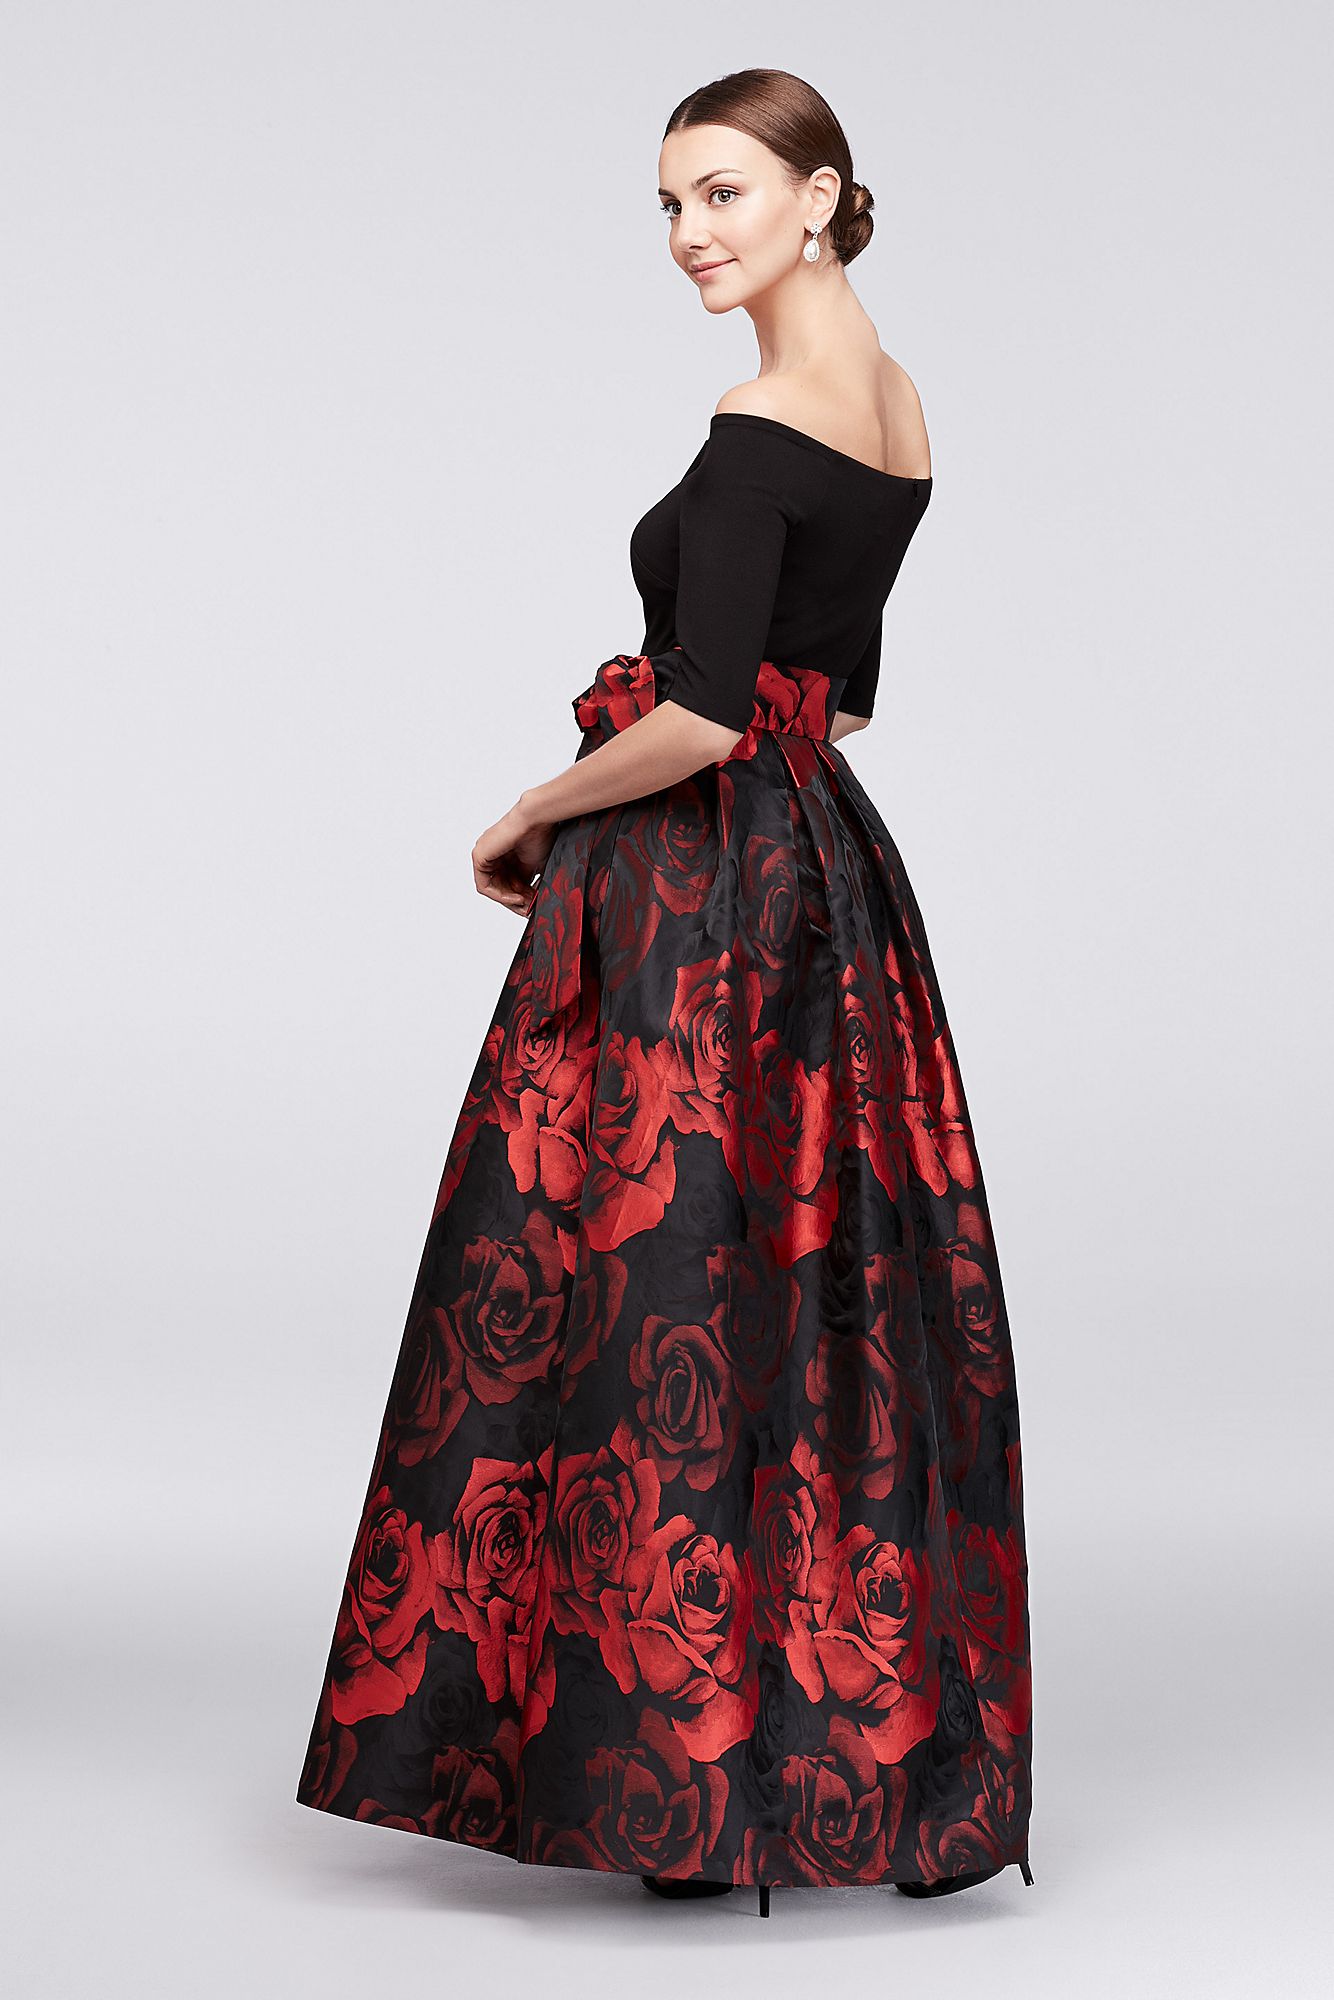 Off-The-Shoulder Crepe and Jacquard JHDM3111 Ball Gown